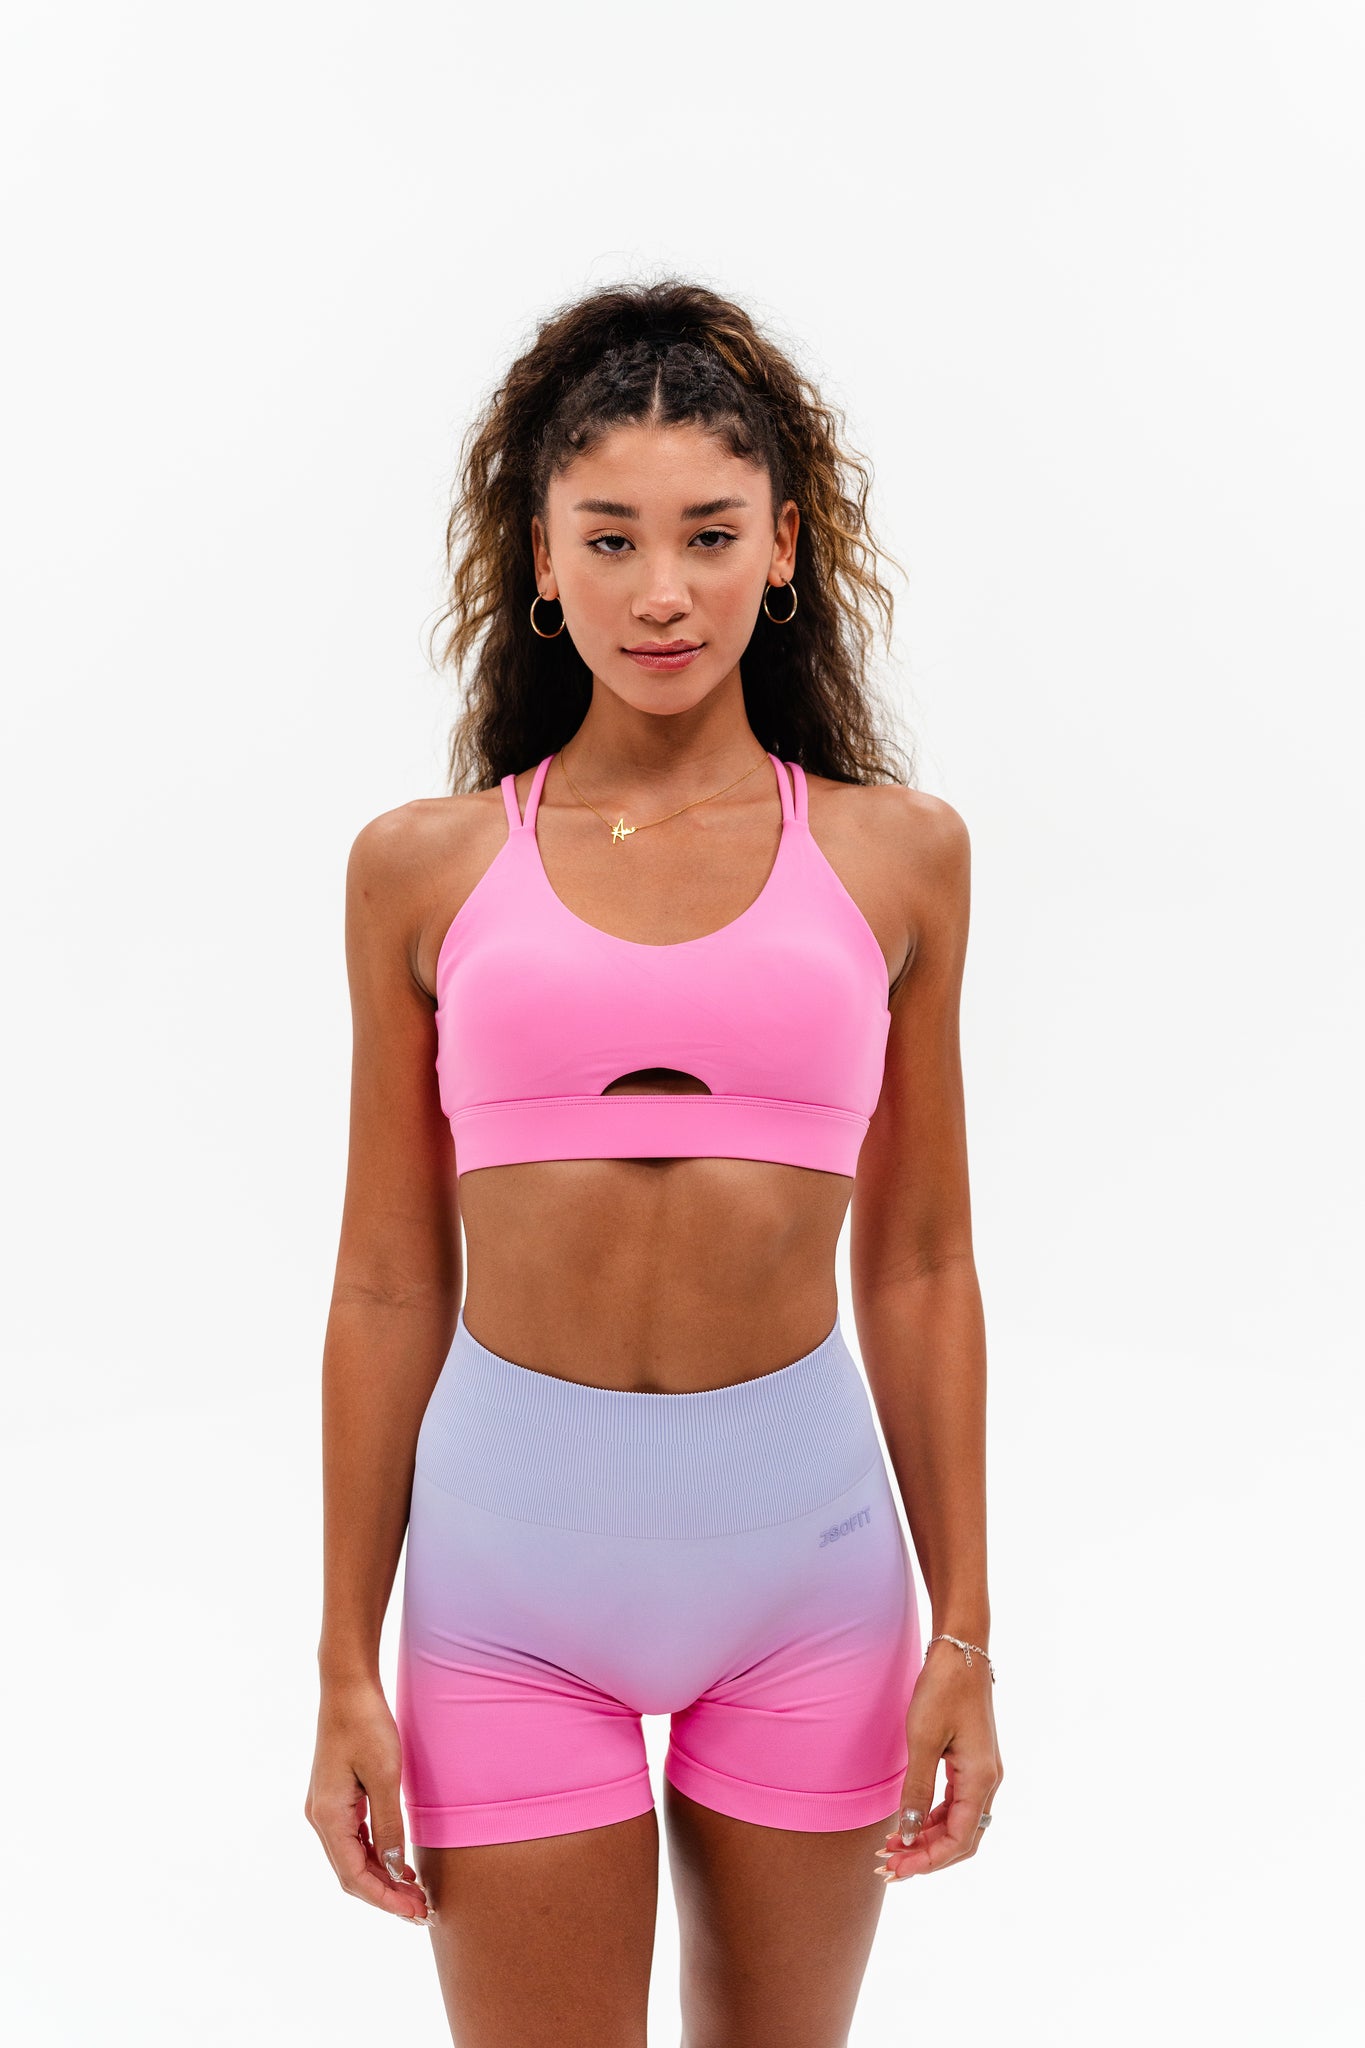 How Should a Sports Bra Fit? – LC Activewear